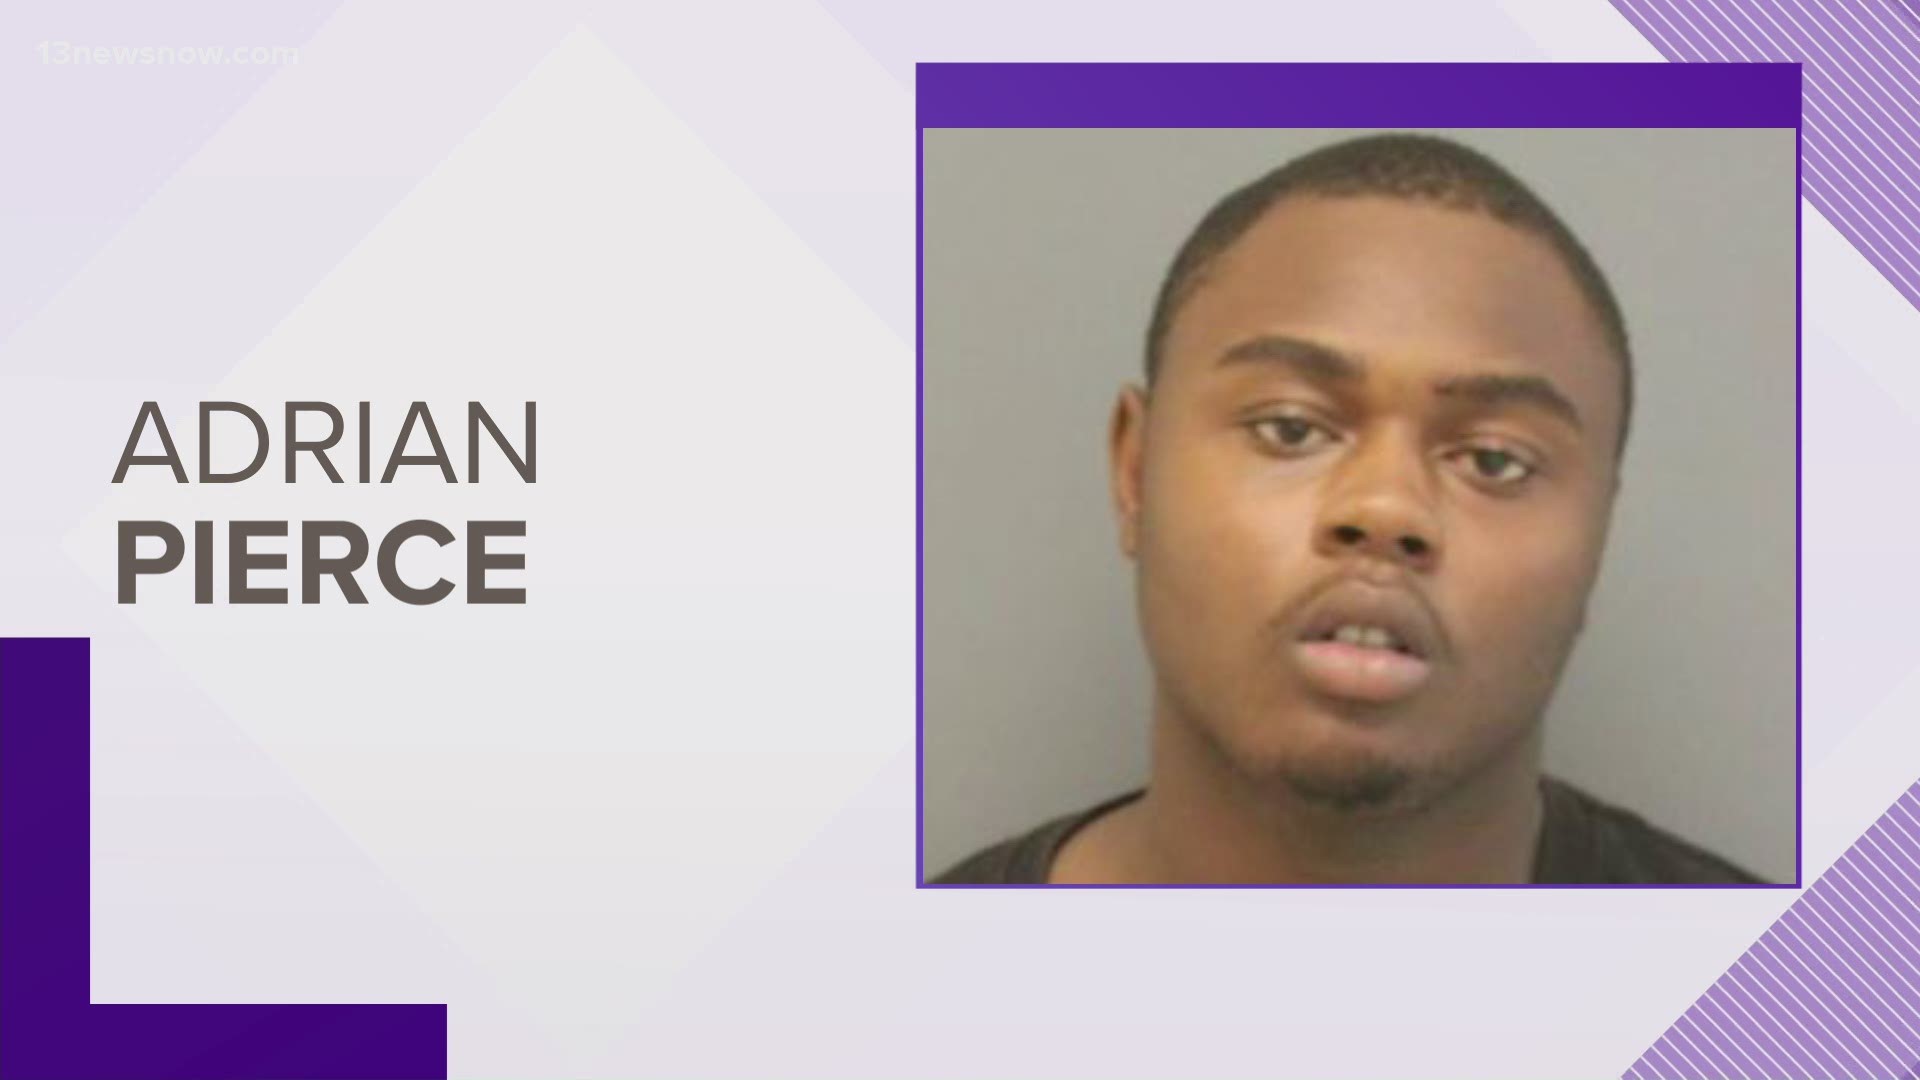 Adrian Pierce faces several charges including second-degree murder for the shooting death of 18-year-old Khali Rahquan Curry.